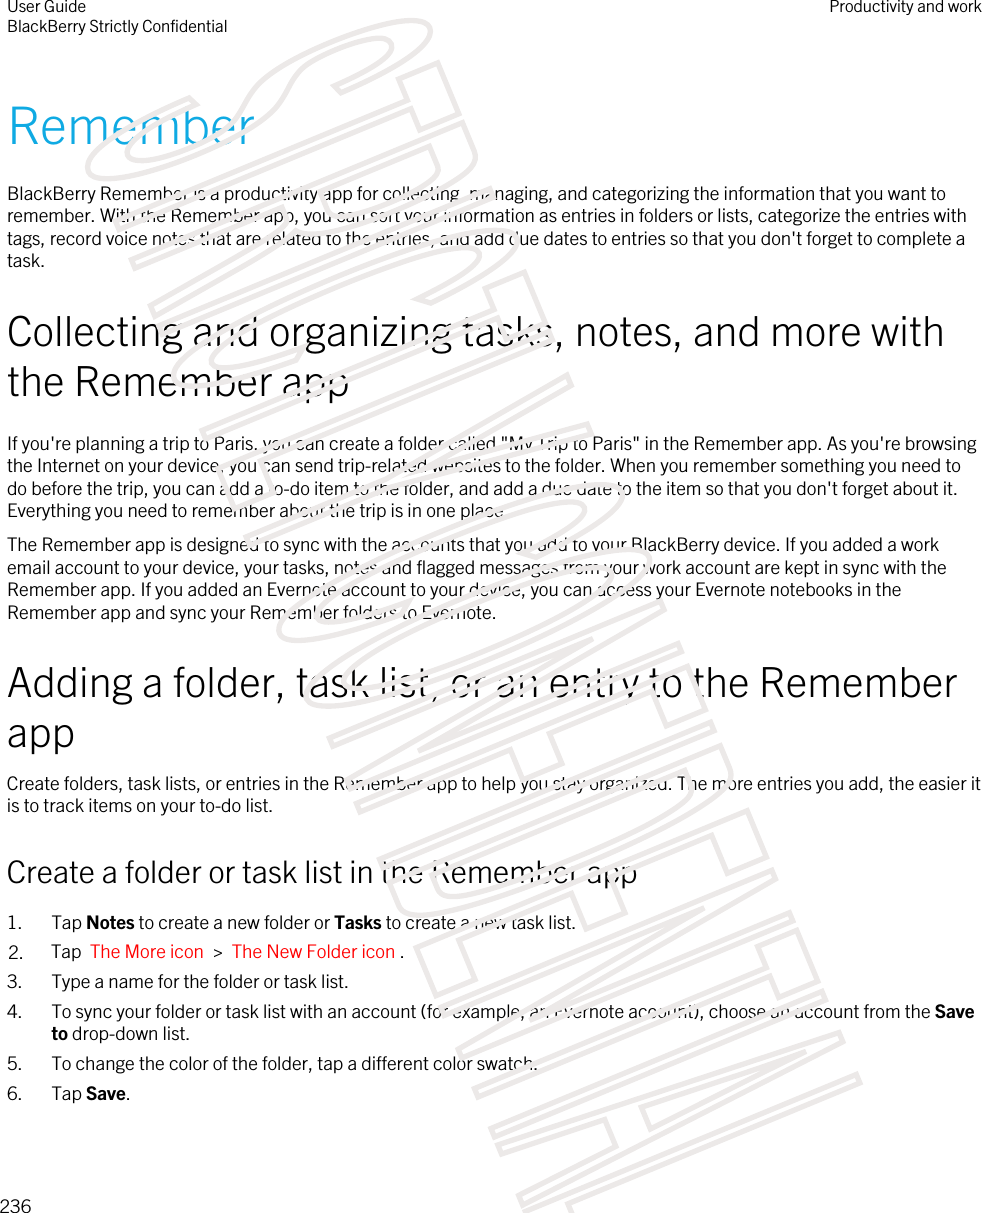 RememberBlackBerry Remember is a productivity app for collecting, managing, and categorizing the information that you want to remember. With the Remember app, you can sort your information as entries in folders or lists, categorize the entries with tags, record voice notes that are related to the entries, and add due dates to entries so that you don&apos;t forget to complete a task.Collecting and organizing tasks, notes, and more with the Remember appIf you&apos;re planning a trip to Paris, you can create a folder called &quot;My Trip to Paris&quot; in the Remember app. As you&apos;re browsing the Internet on your device, you can send trip-related websites to the folder. When you remember something you need to do before the trip, you can add a to-do item to the folder, and add a due date to the item so that you don&apos;t forget about it. Everything you need to remember about the trip is in one place.The Remember app is designed to sync with the accounts that you add to your BlackBerry device. If you added a work email account to your device, your tasks, notes and flagged messages from your work account are kept in sync with the Remember app. If you added an Evernote account to your device, you can access your Evernote notebooks in the Remember app and sync your Remember folders to Evernote.Adding a folder, task list, or an entry to the Remember appCreate folders, task lists, or entries in the Remember app to help you stay organized. The more entries you add, the easier it is to track items on your to-do list.Create a folder or task list in the Remember app1. Tap Notes to create a new folder or Tasks to create a new task list.2. Tap  The More icon  &gt;  The New Folder icon .3. Type a name for the folder or task list.4. To sync your folder or task list with an account (for example, an Evernote account), choose an account from the Save to drop-down list.5. To change the color of the folder, tap a different color swatch.6. Tap Save.User GuideBlackBerry Strictly ConfidentialProductivity and work236STRICTLY CONFIDENTIAL